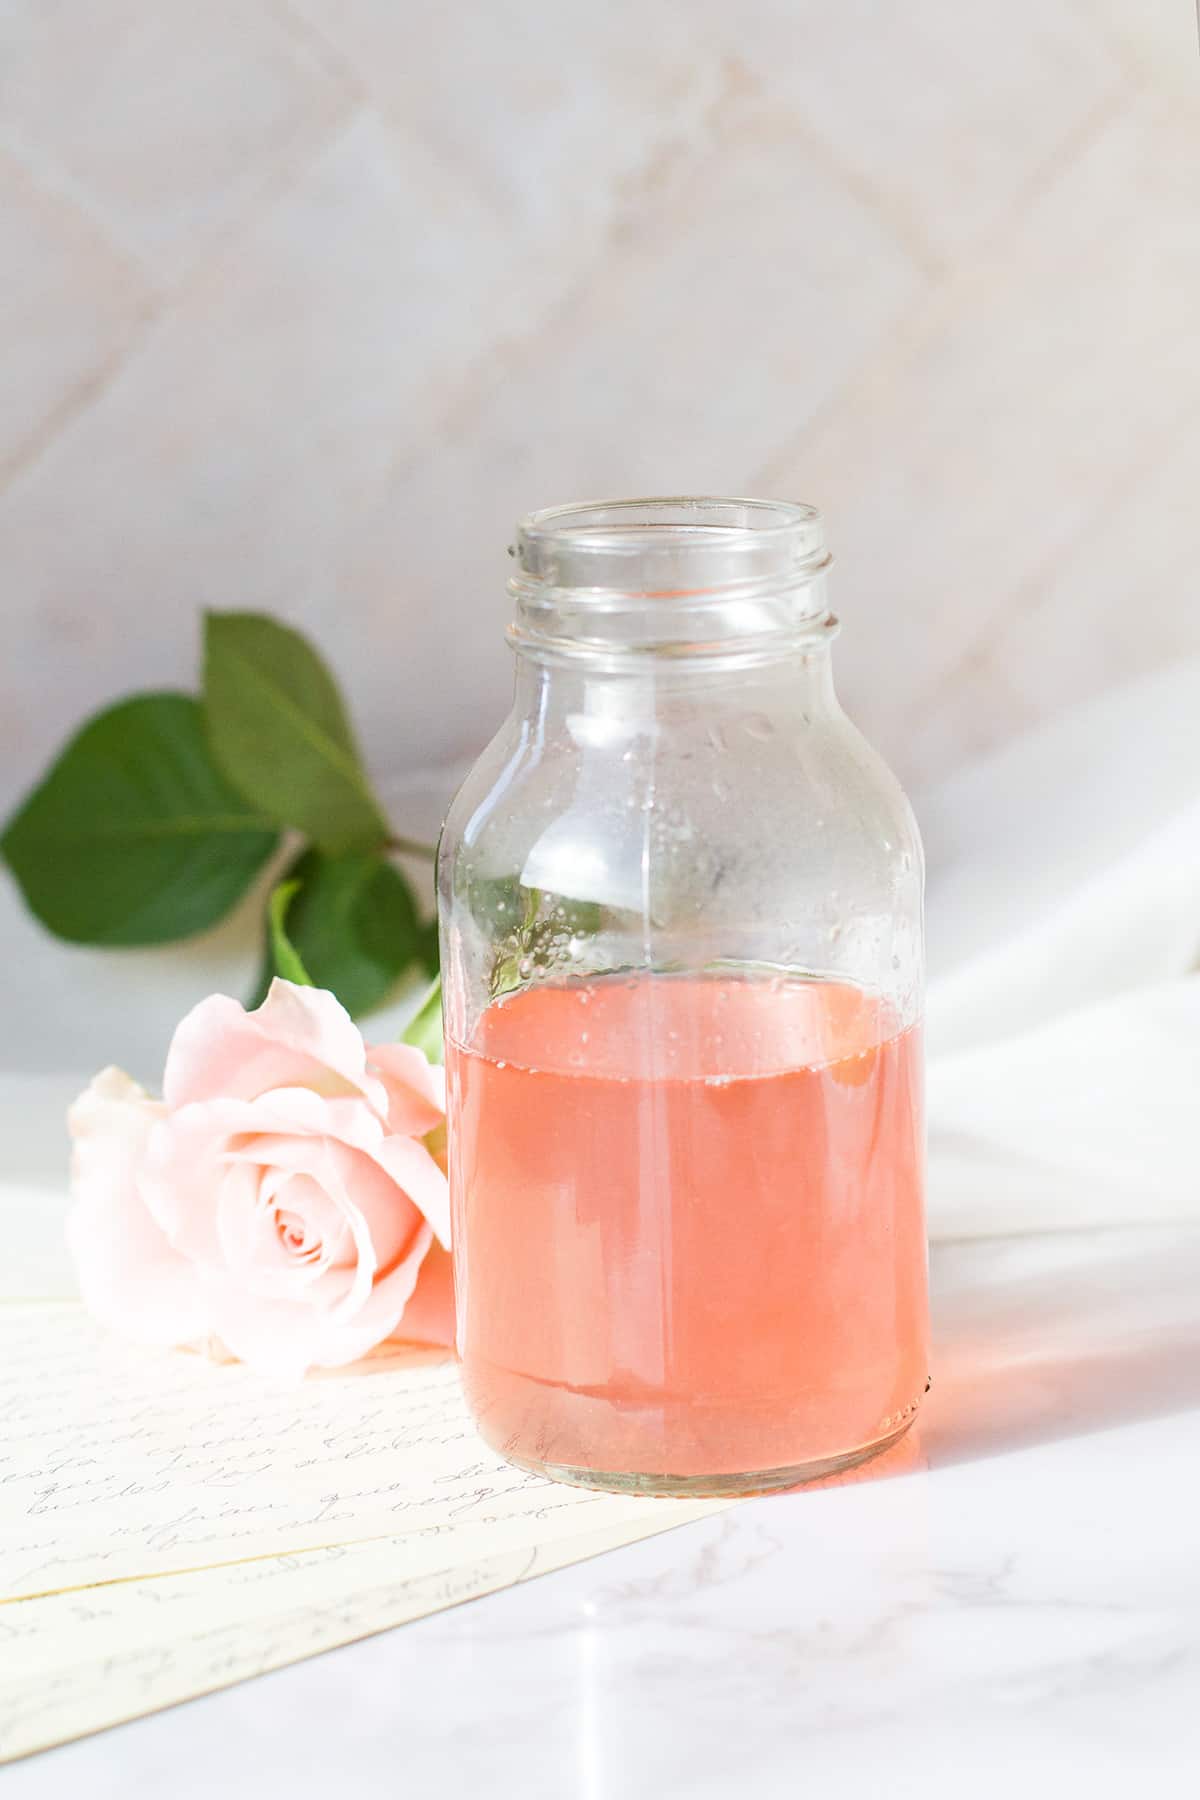 Rhubarb syrup in a glass bottle, pink rose in the background.